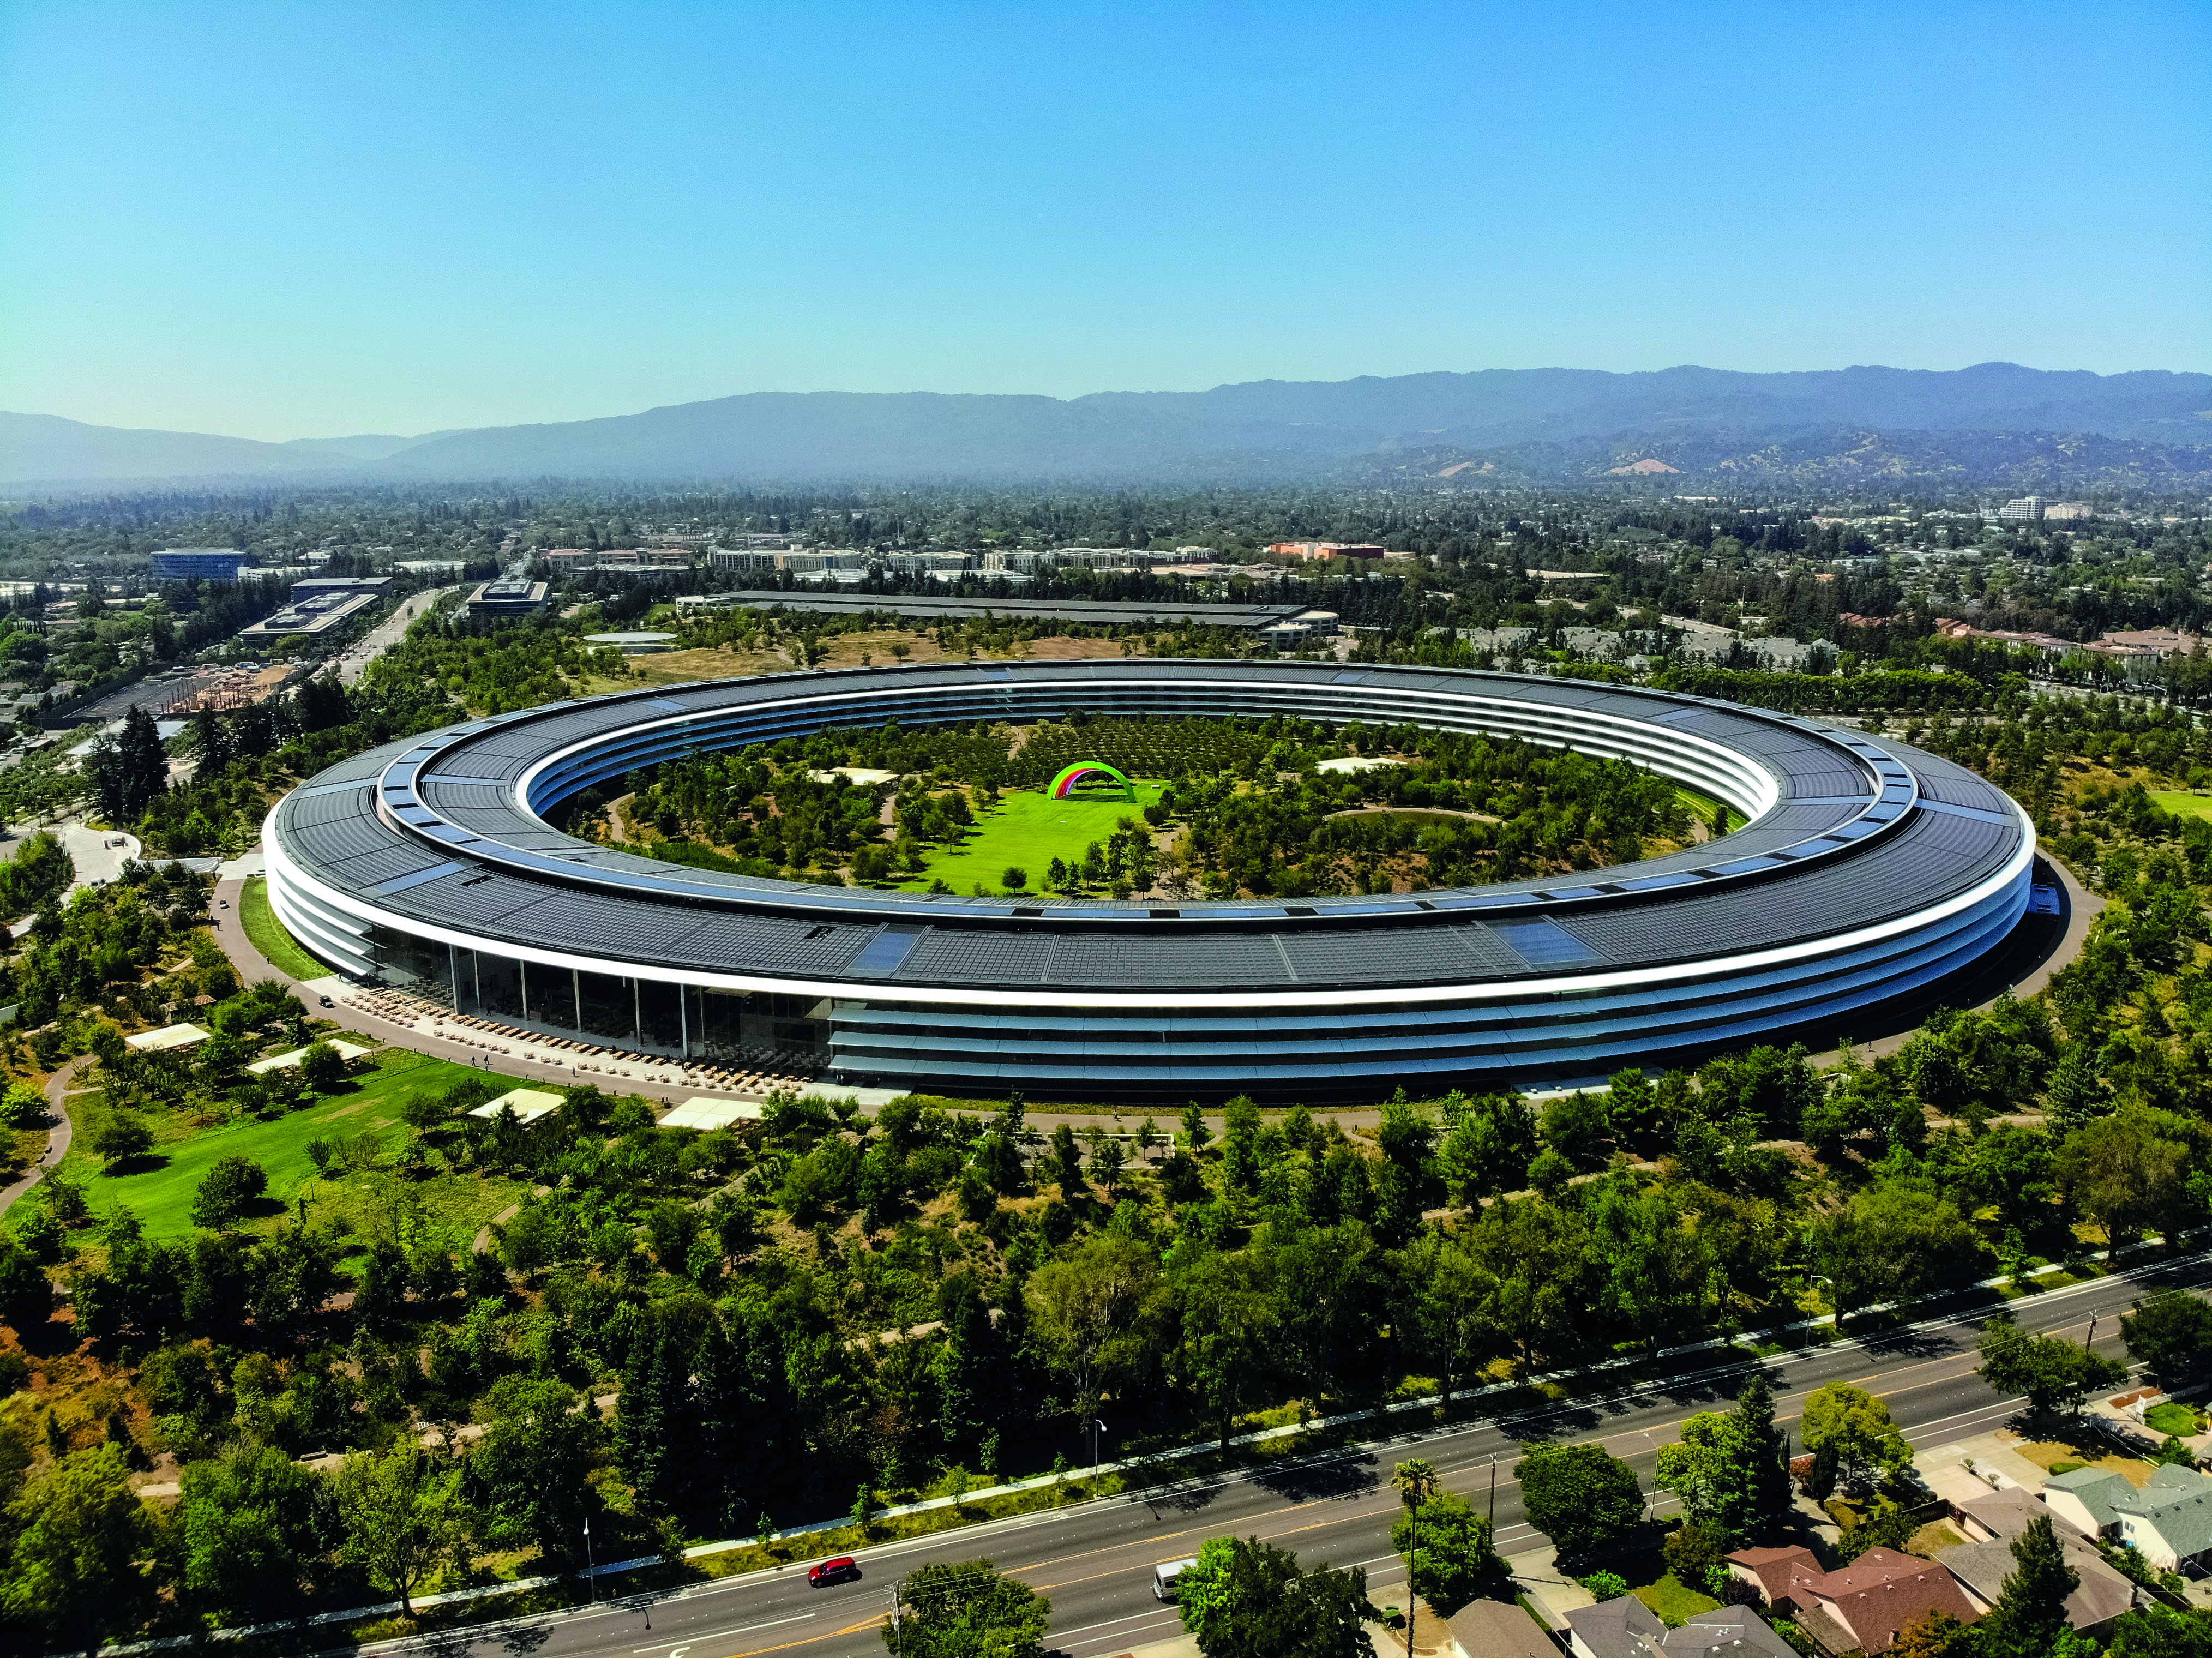 Sunnyvale, California, USA - July 30, 2019: Cars driving past Apple Park, an iconic building located in Sunnyvale California. This image was taken on the morning of July 30, 2019. Apple Park serves as the international headquarters of Apple, Inc. The roof contains solar arrays that power the building.